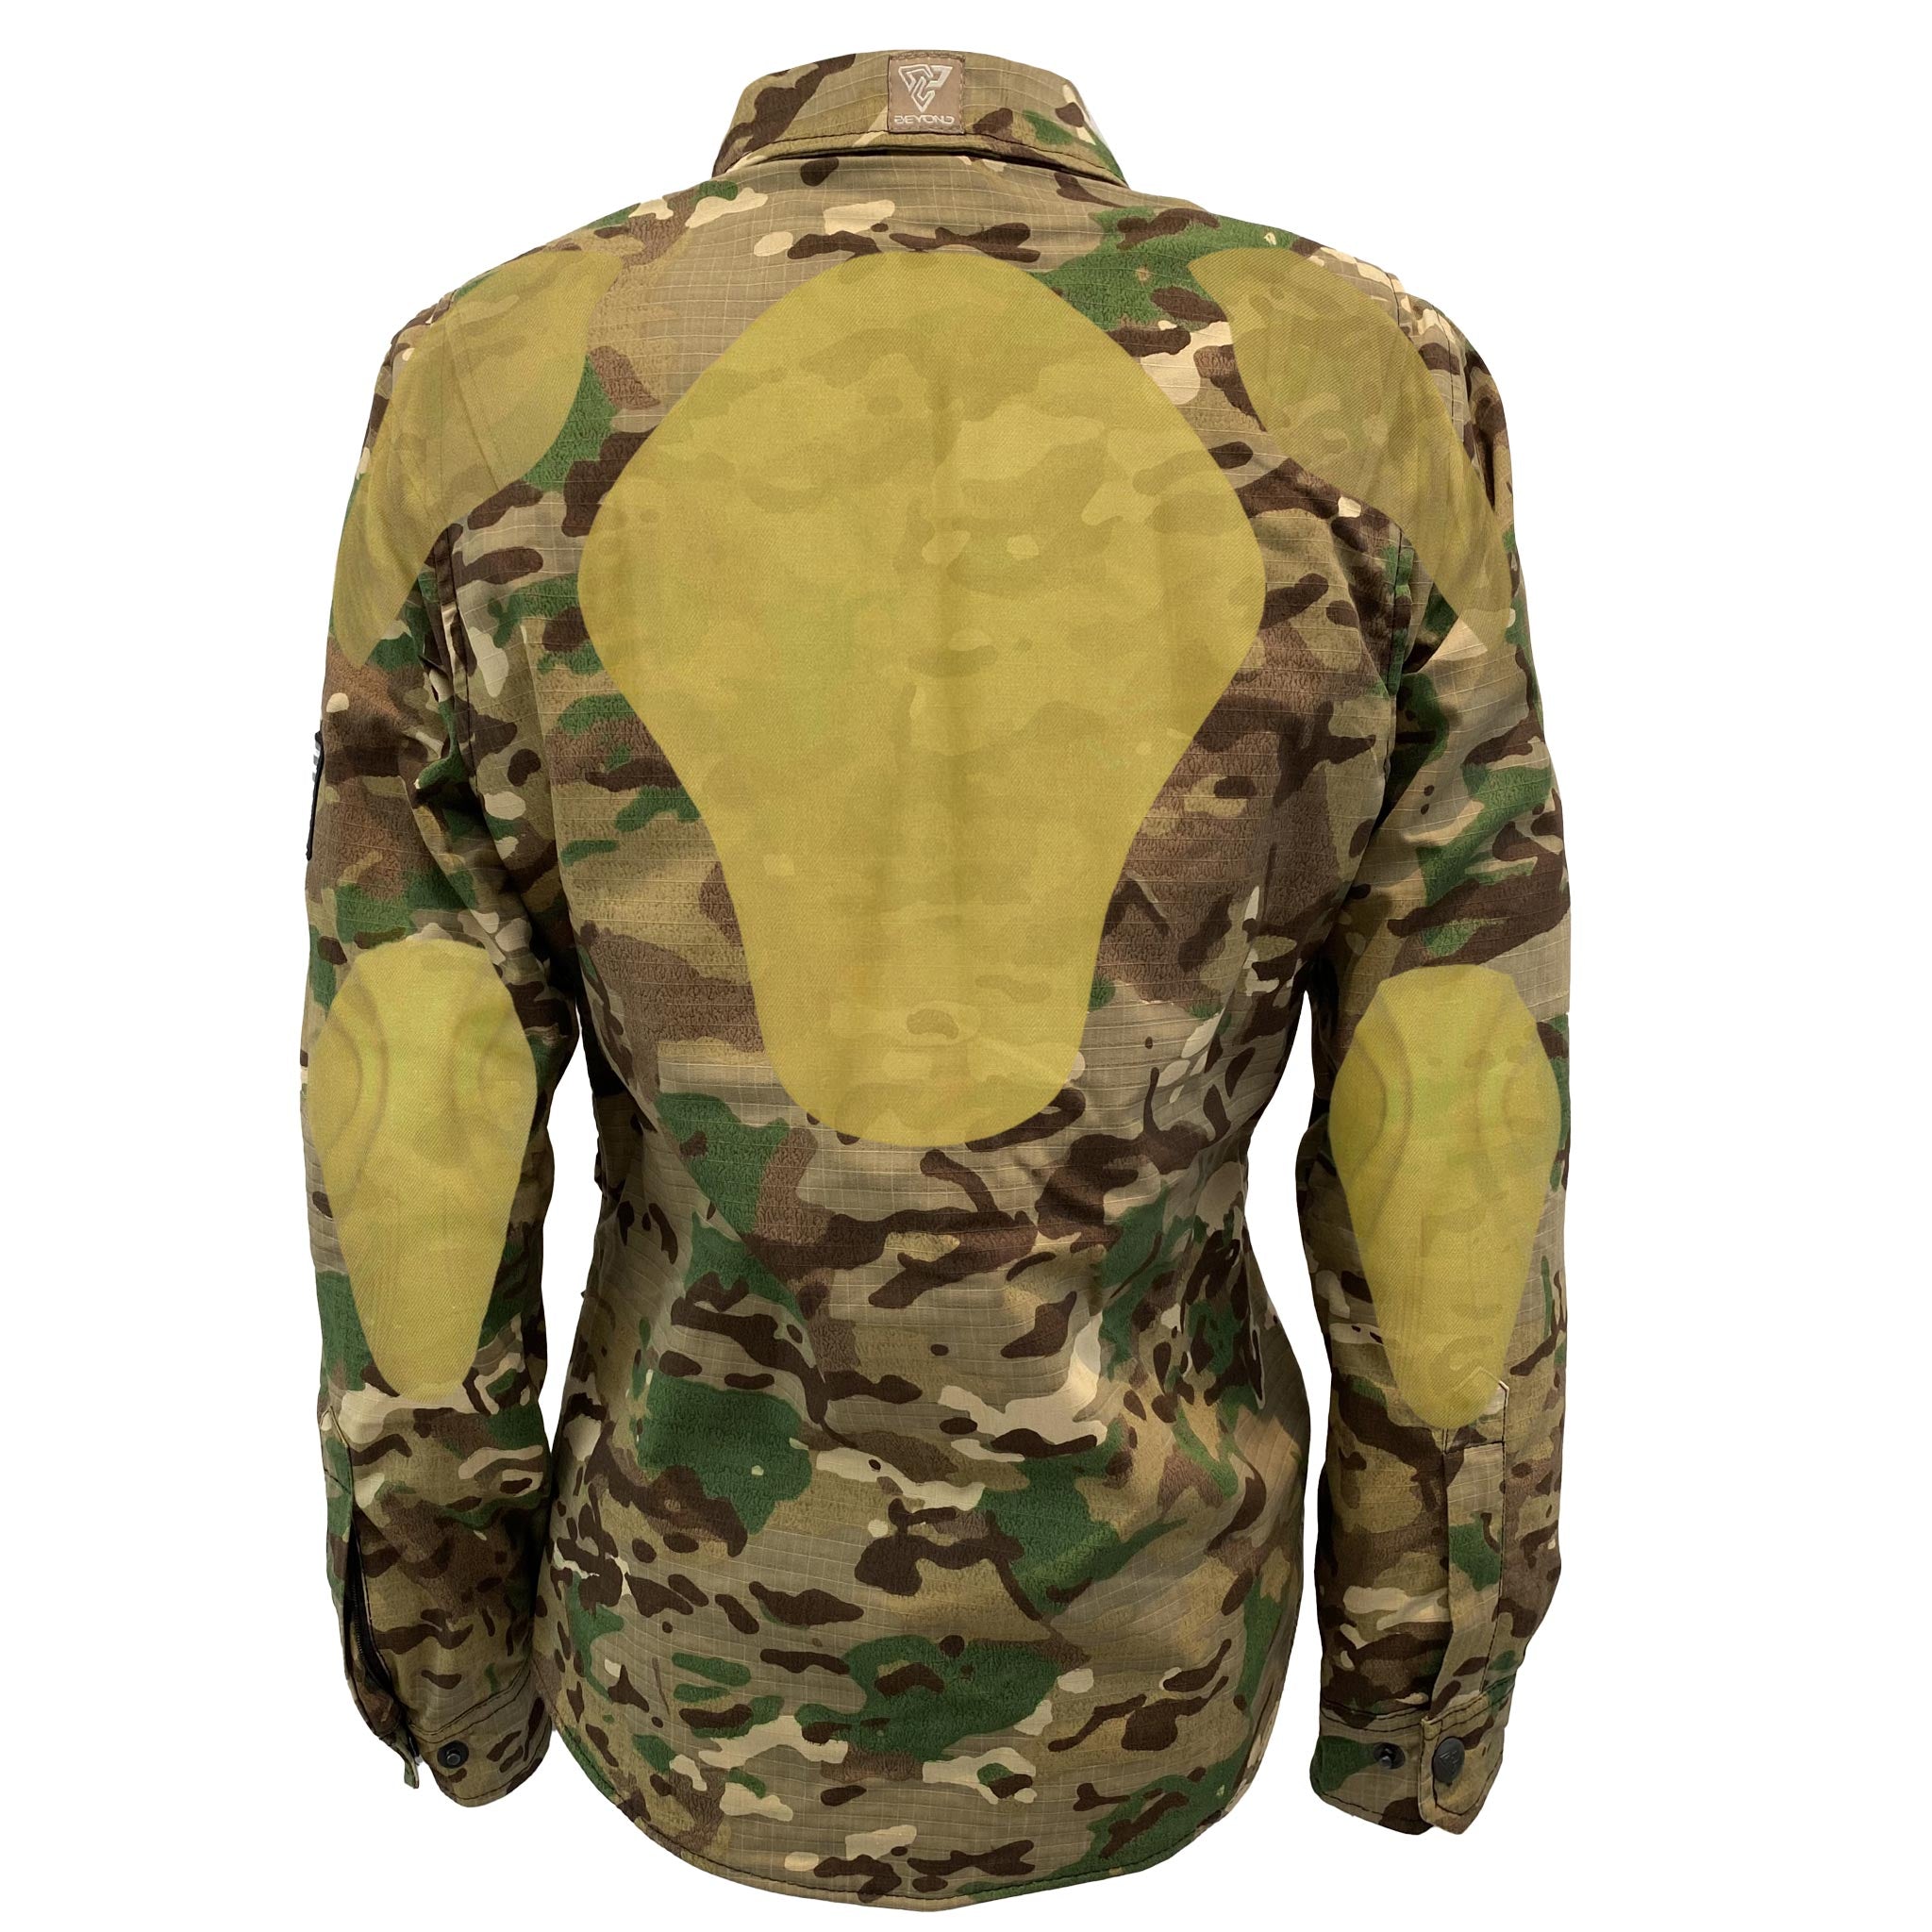 Protective Camouflage Shirt for Women "Delta Four" -  Light color